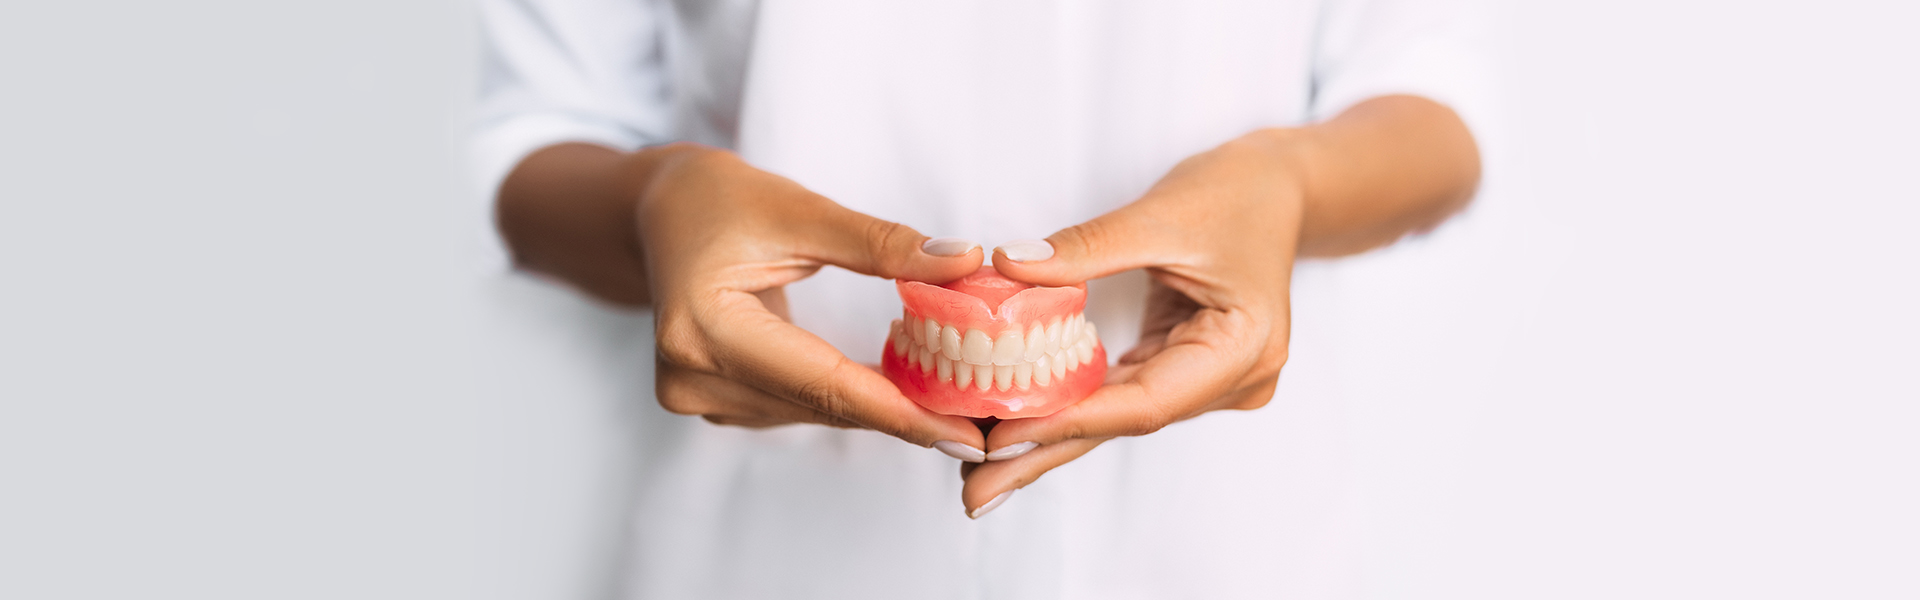 How Dentures Help Restore Mouth Functionality post Tooth Loss